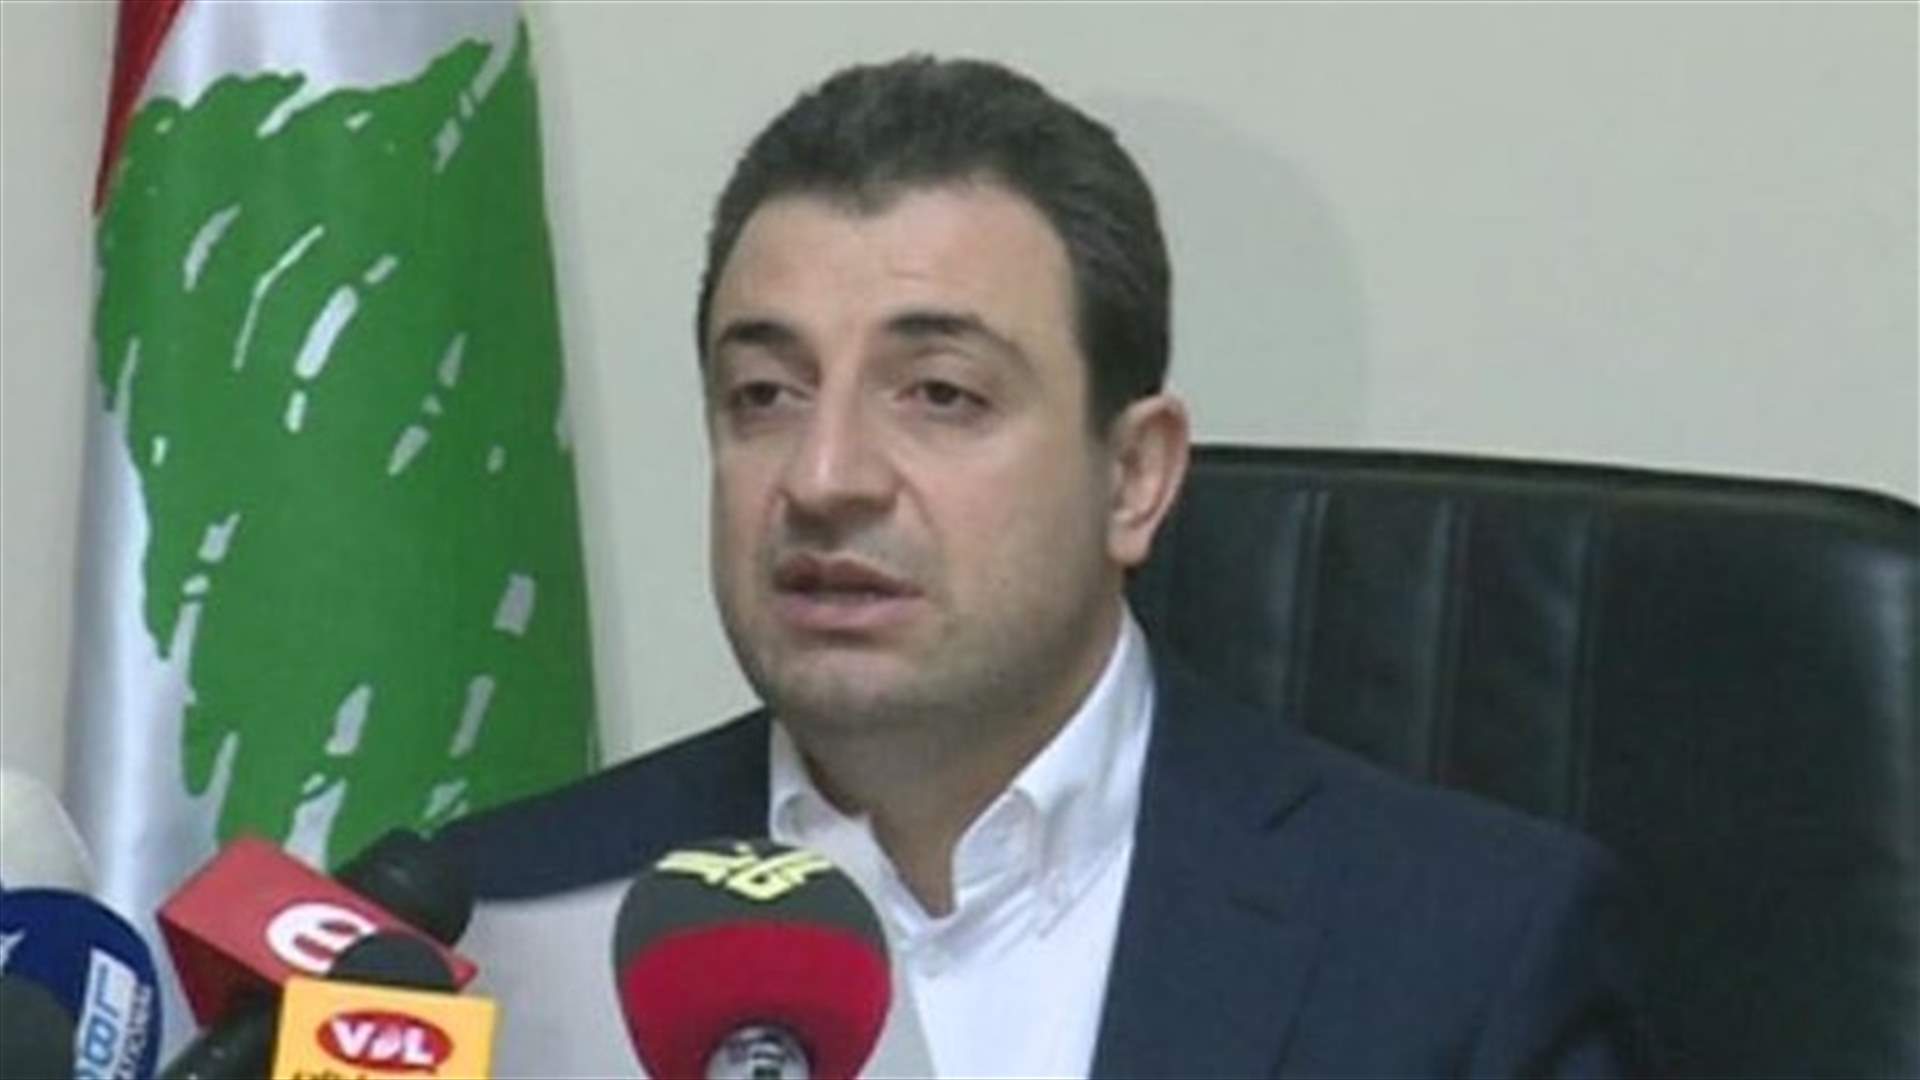 REPORT: Minister Abou Faour holds press conference, unveils new blacklist 